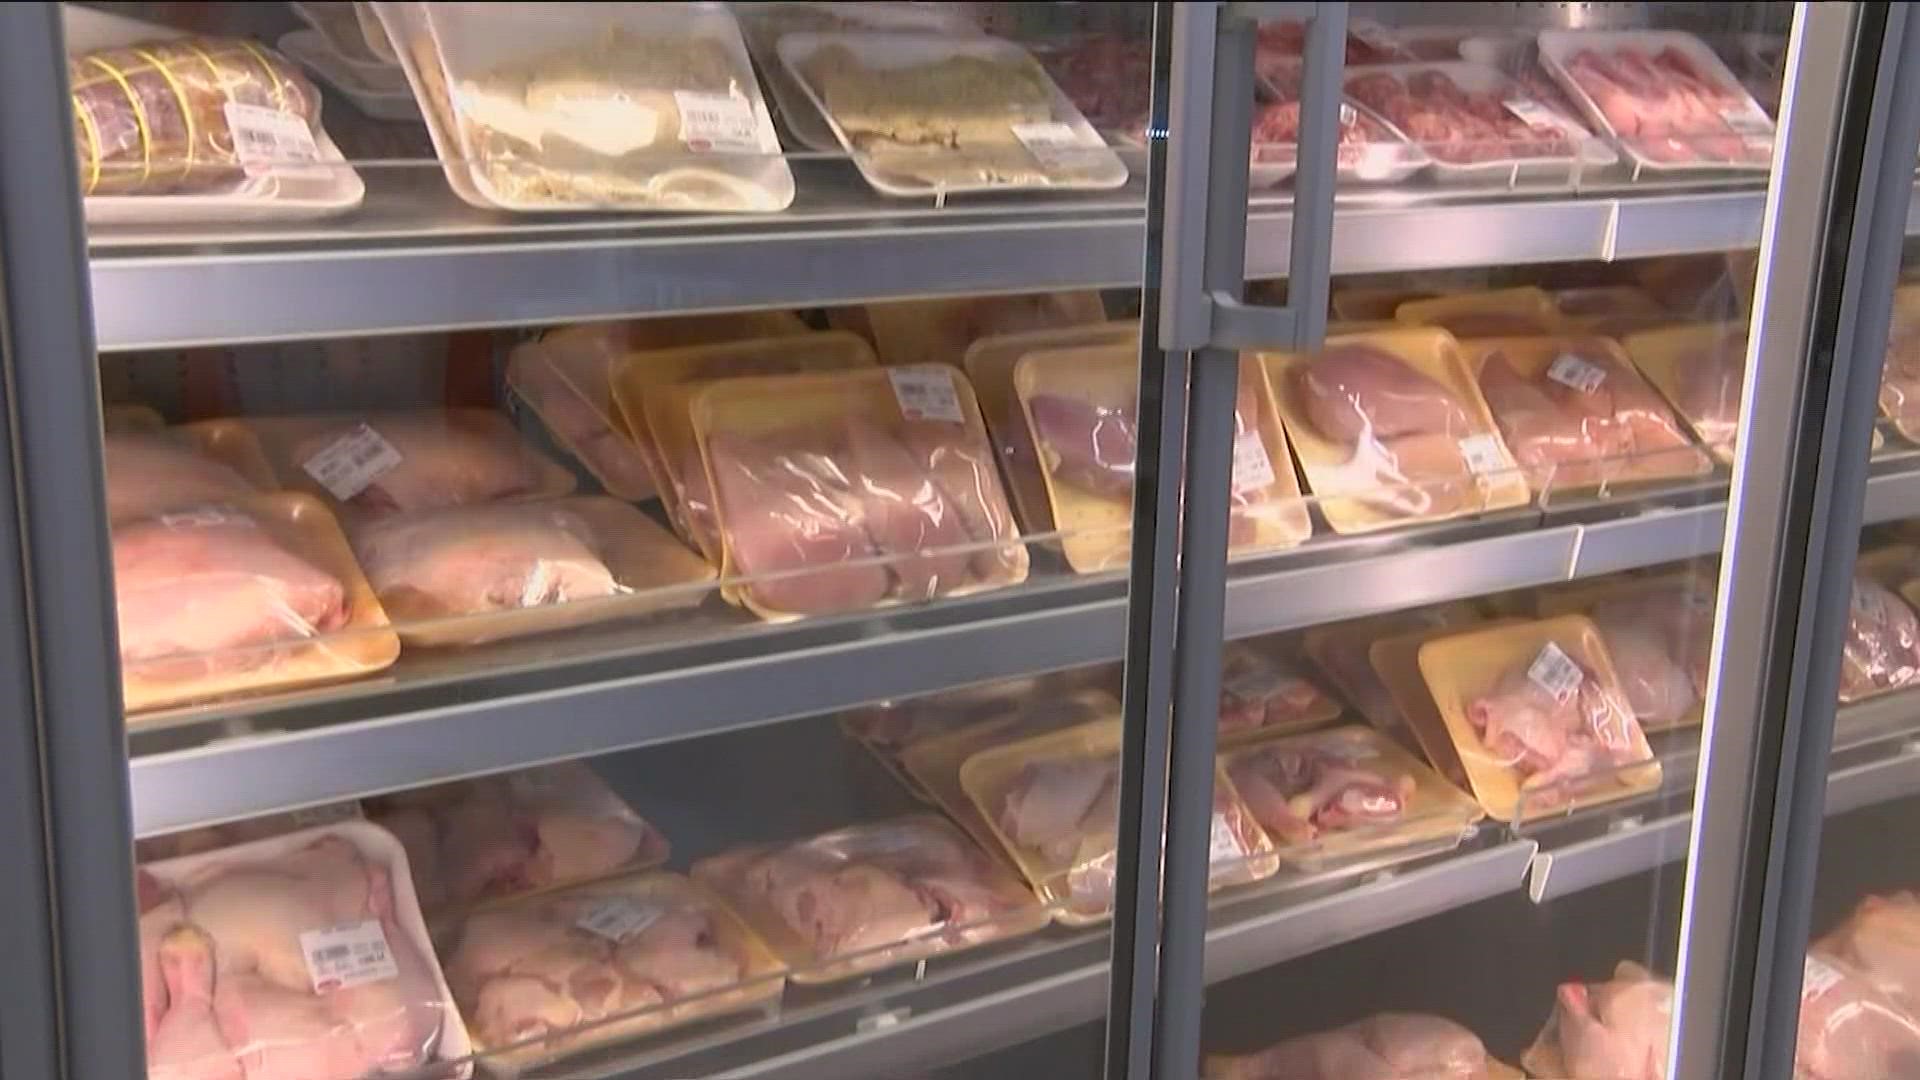 The cost of chicken had remained higher than usual even after other meat prices came down.